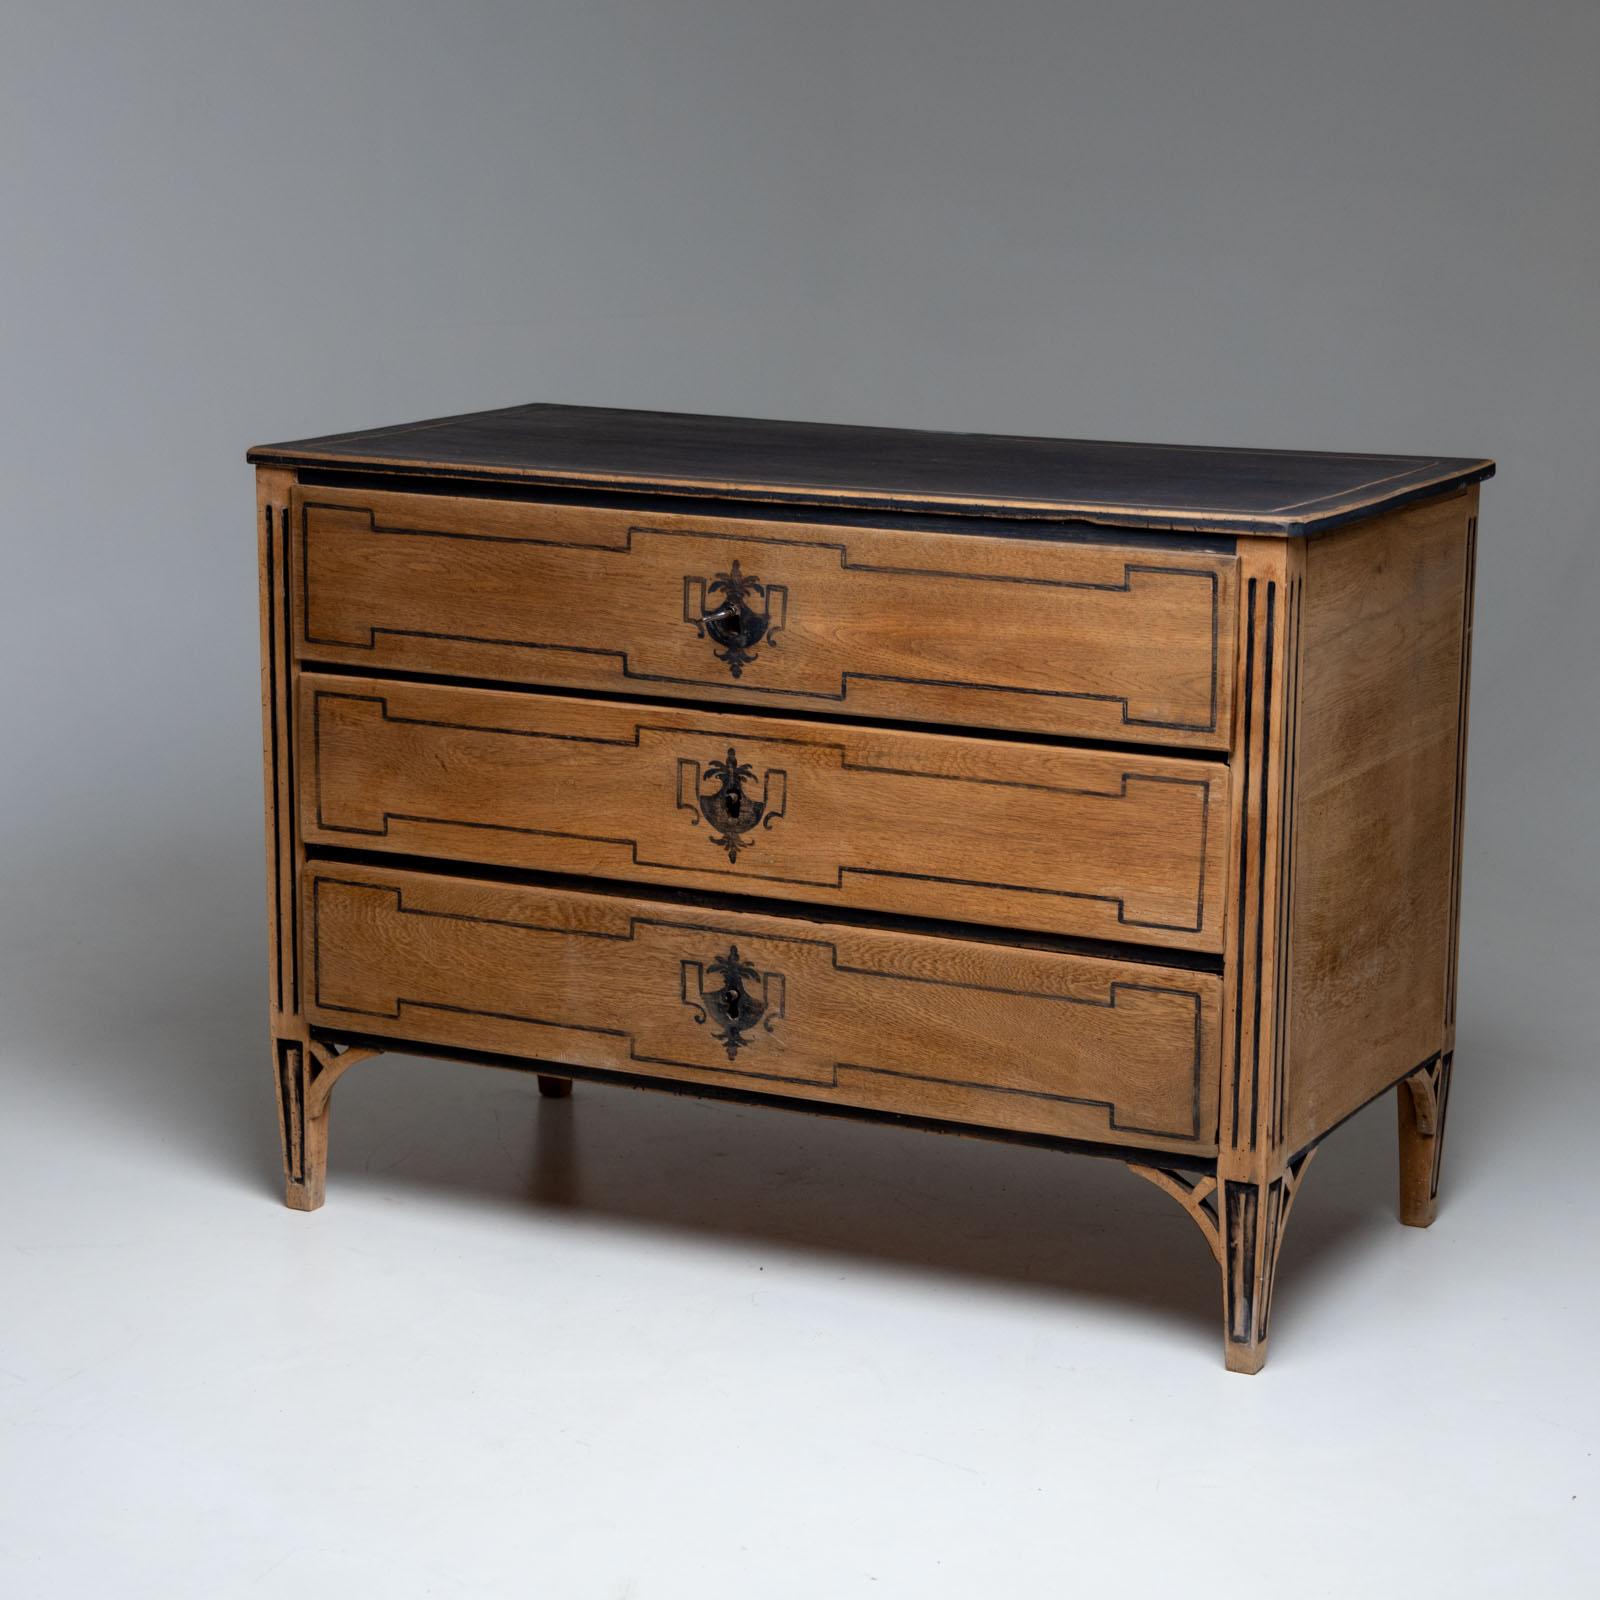 Neoclassical Painted oak chest of drawers, around 1800